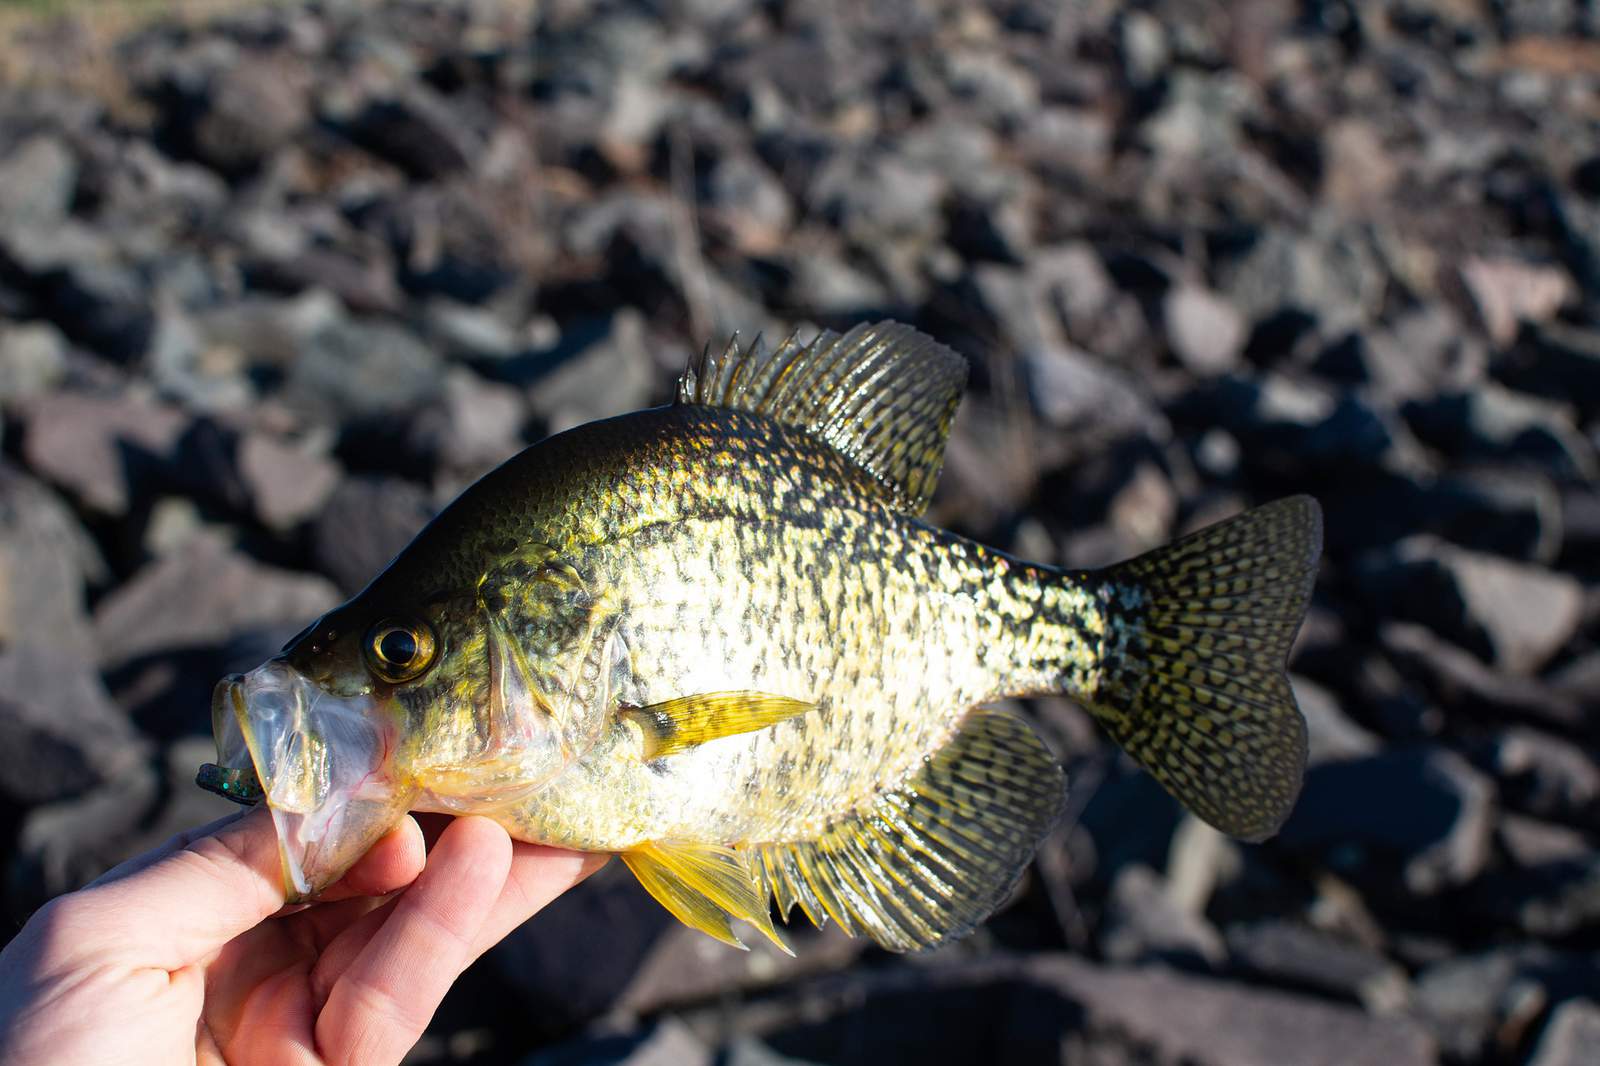 12 crappie fishing ‘hot spots’ according to Texas Parks and Wildlife officials